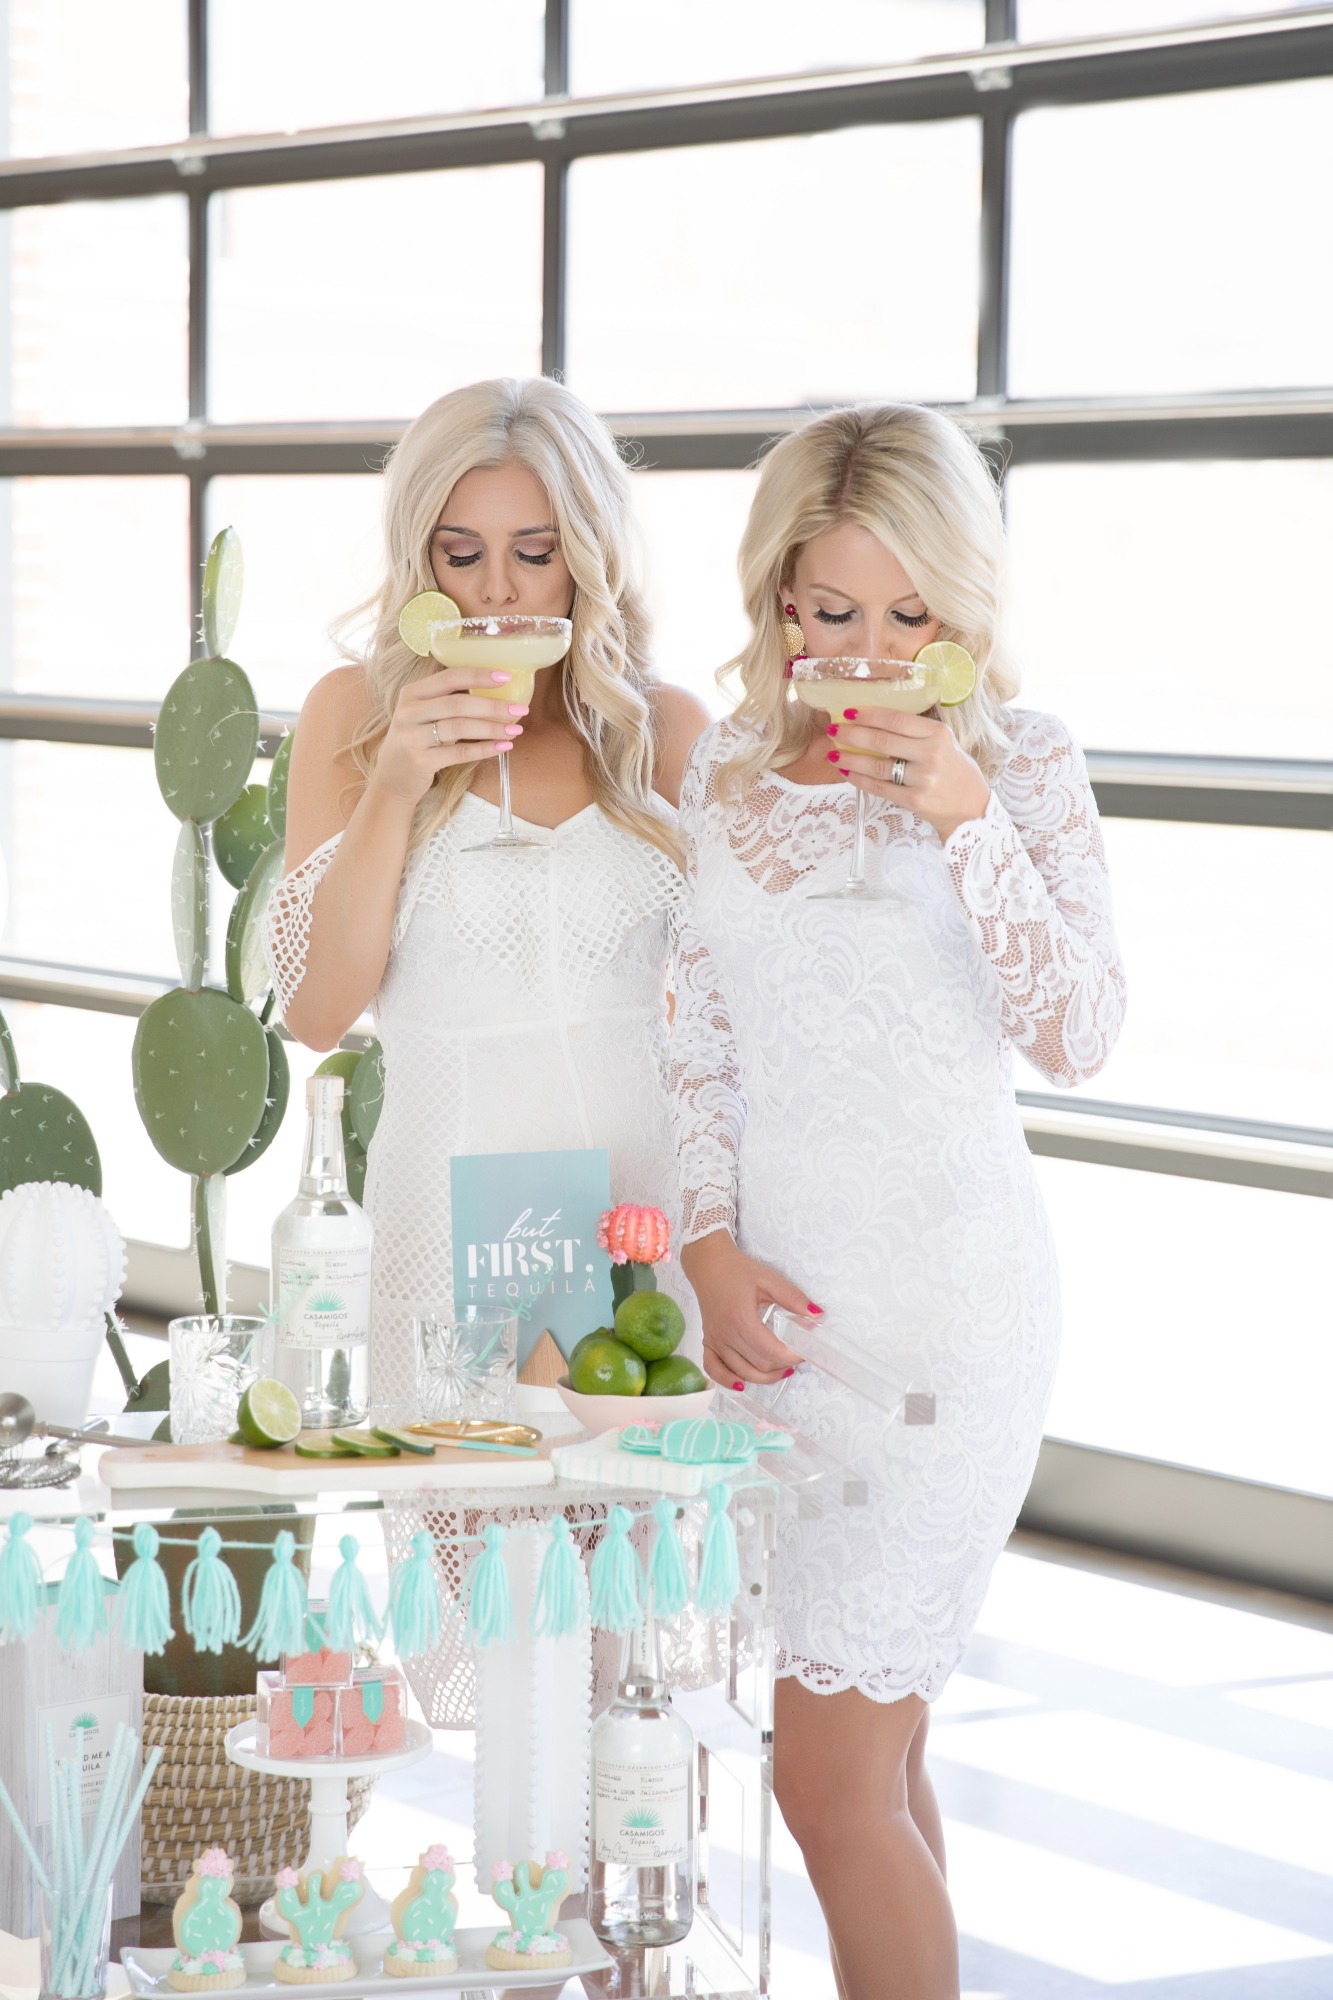 Margaritas and Bar Cart from Chic Floral Fiesta Styled by One Stylish Party | Black Twine